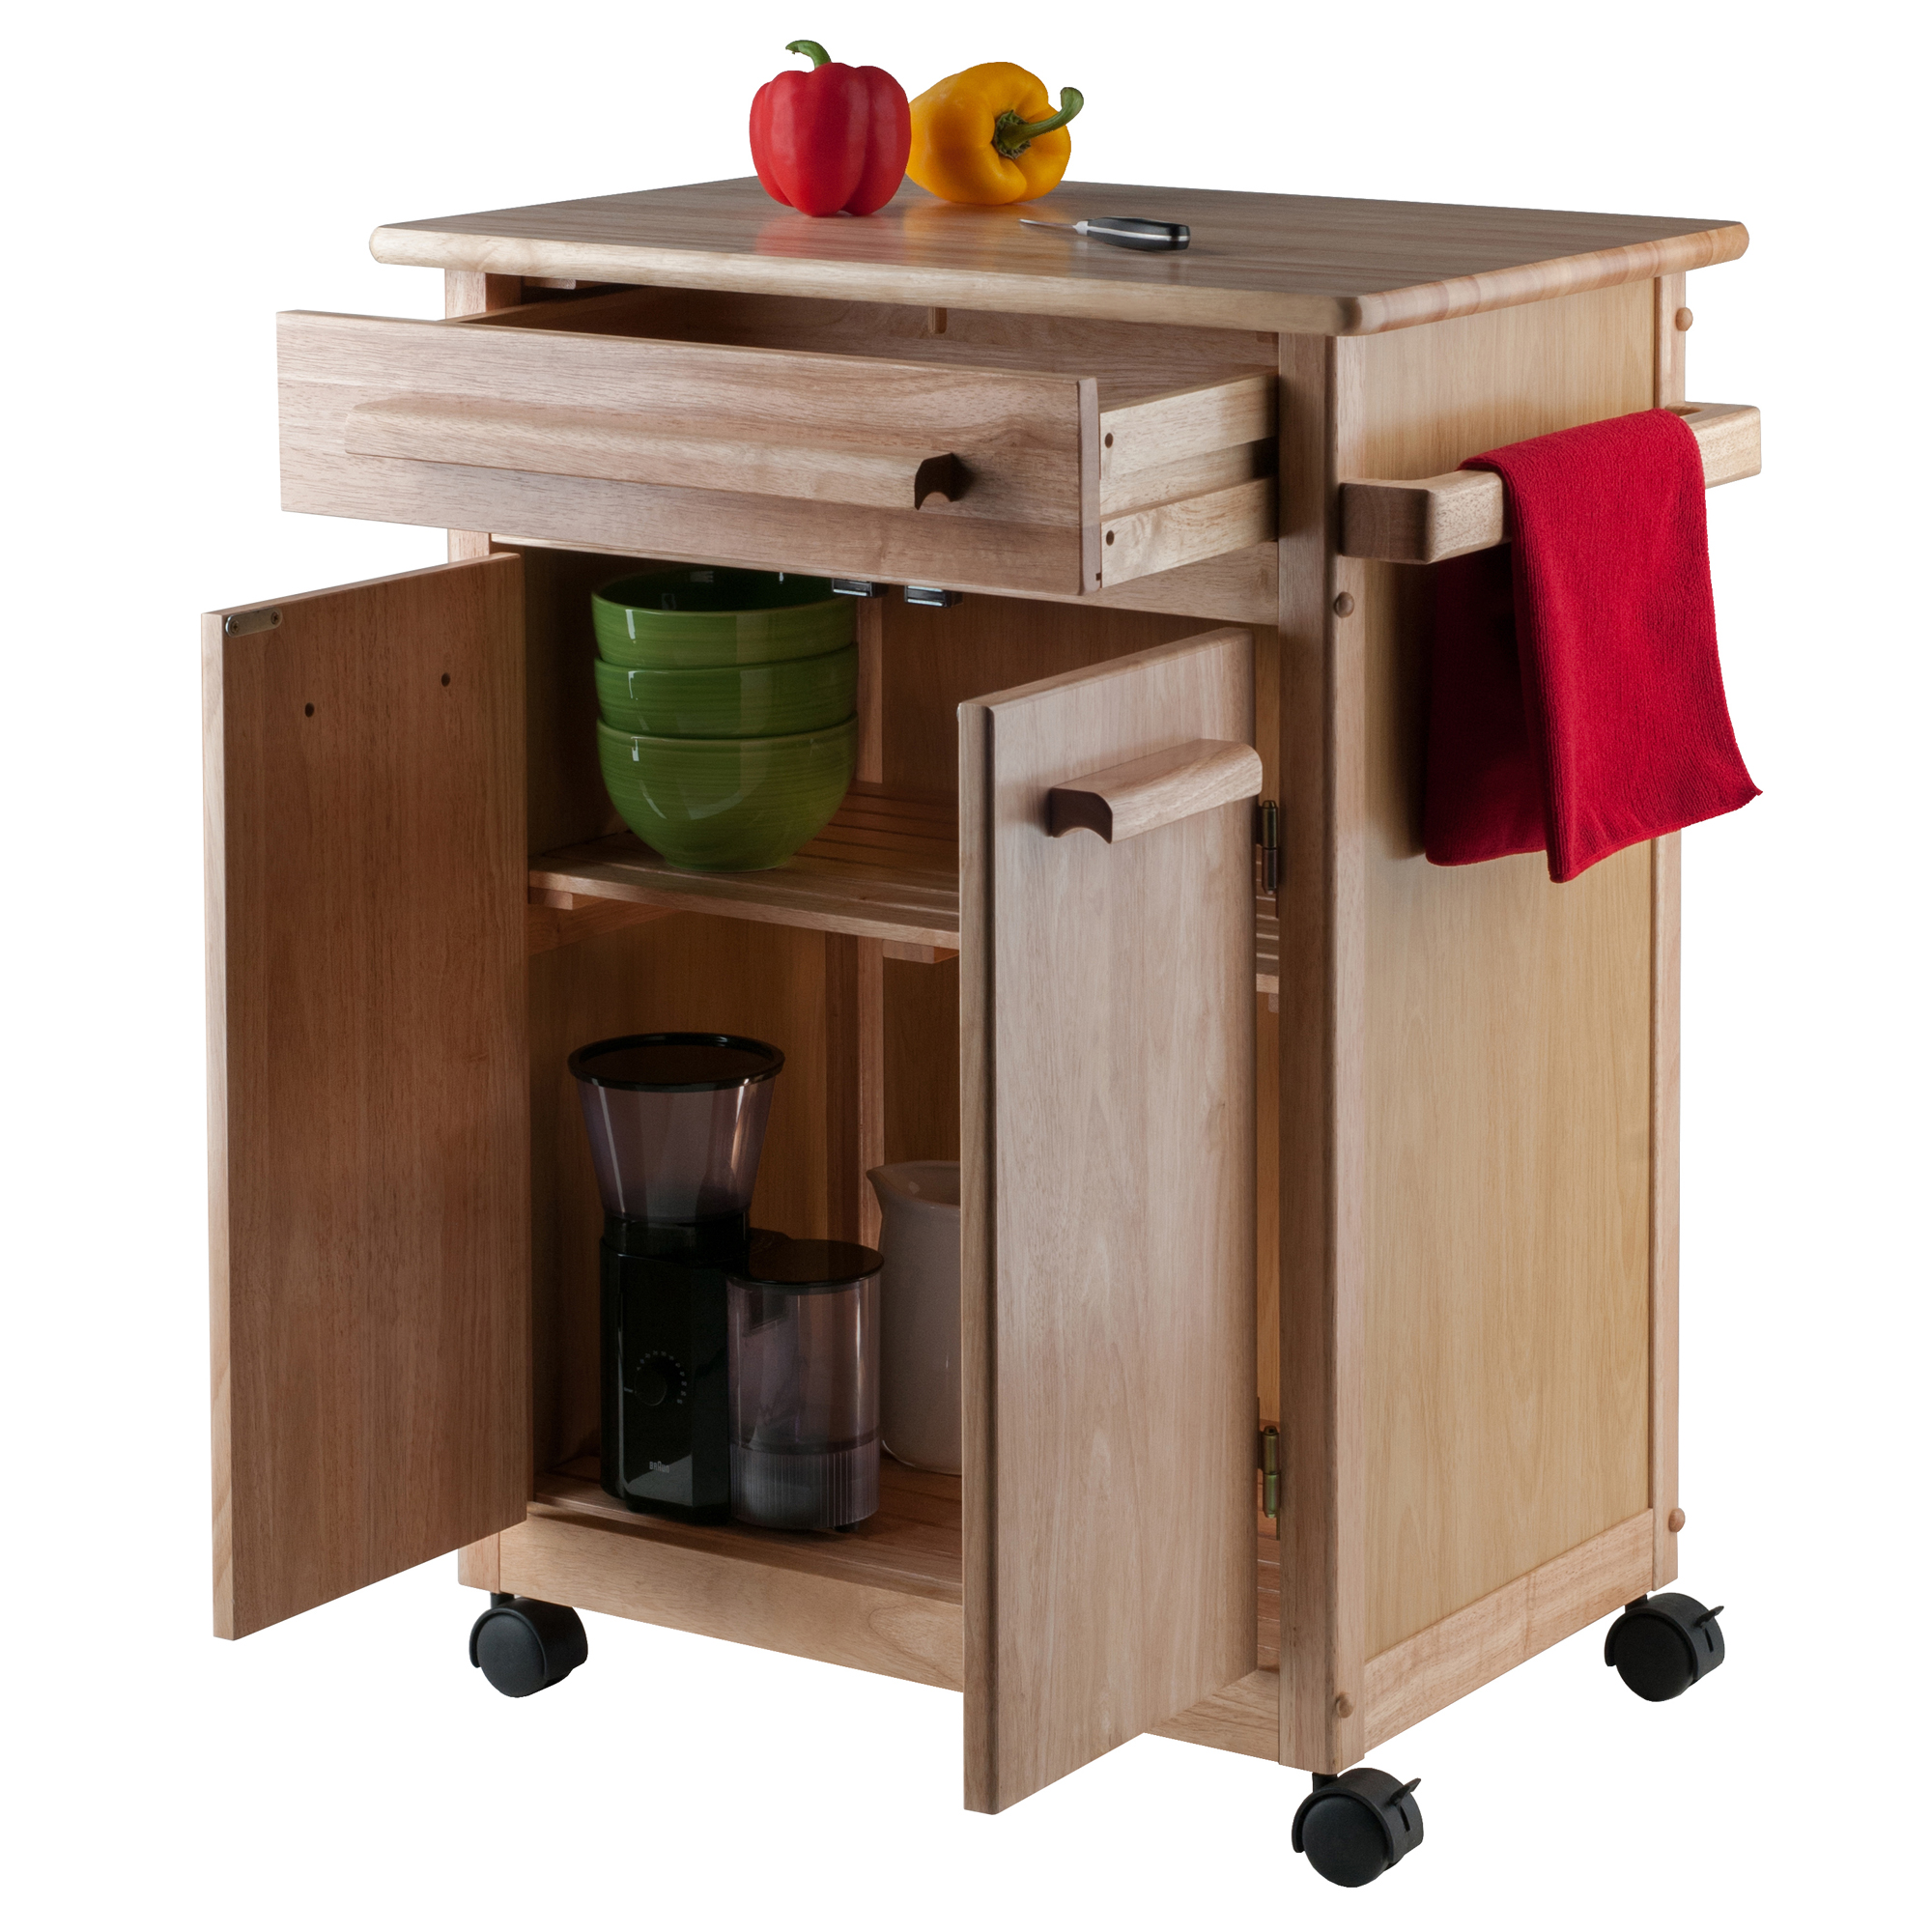 Winsome Wood Hackett Kitchen Utility Cart, Natural Finish - image 3 of 11